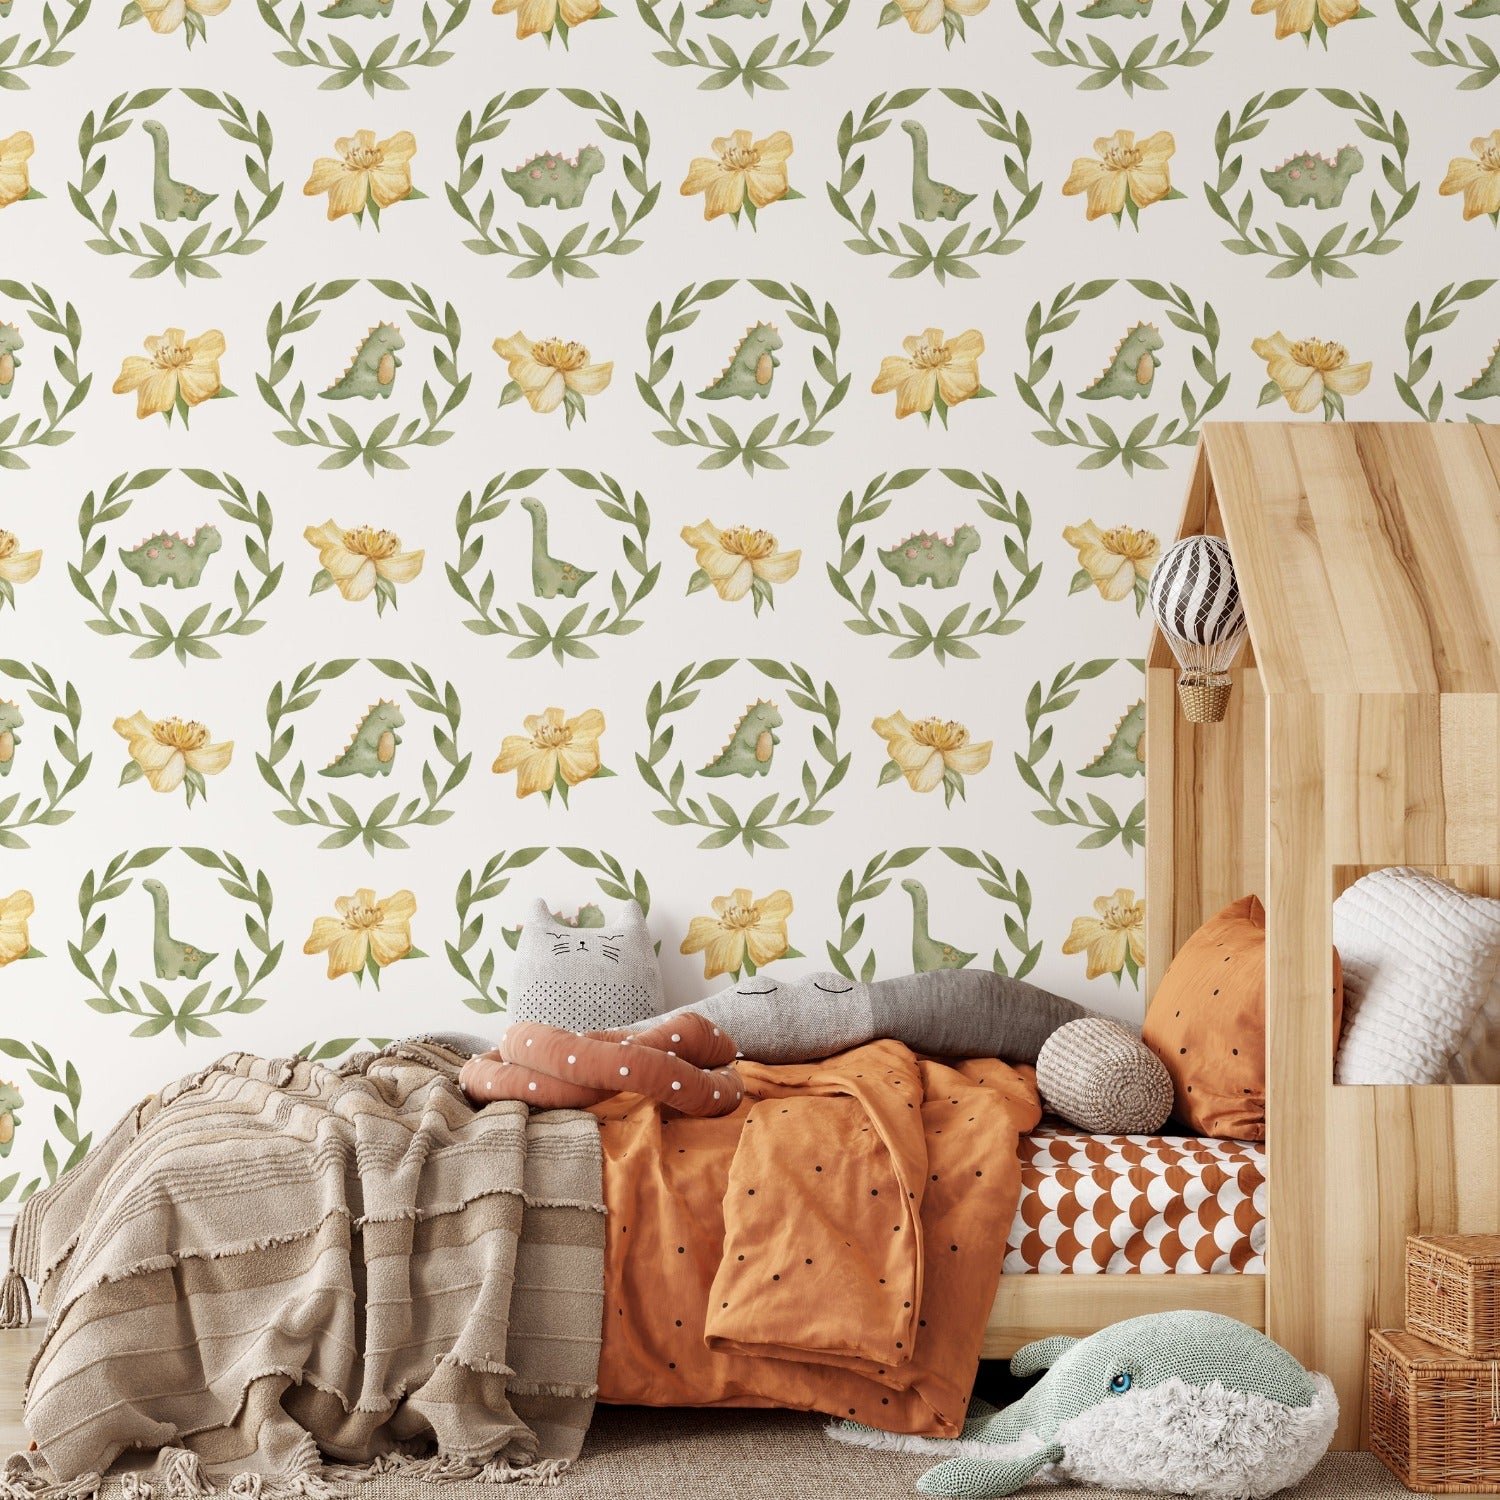 Nursery room decorated with baby dinosaur watercolor wallpaper featuring floral and dinosaur patterns.